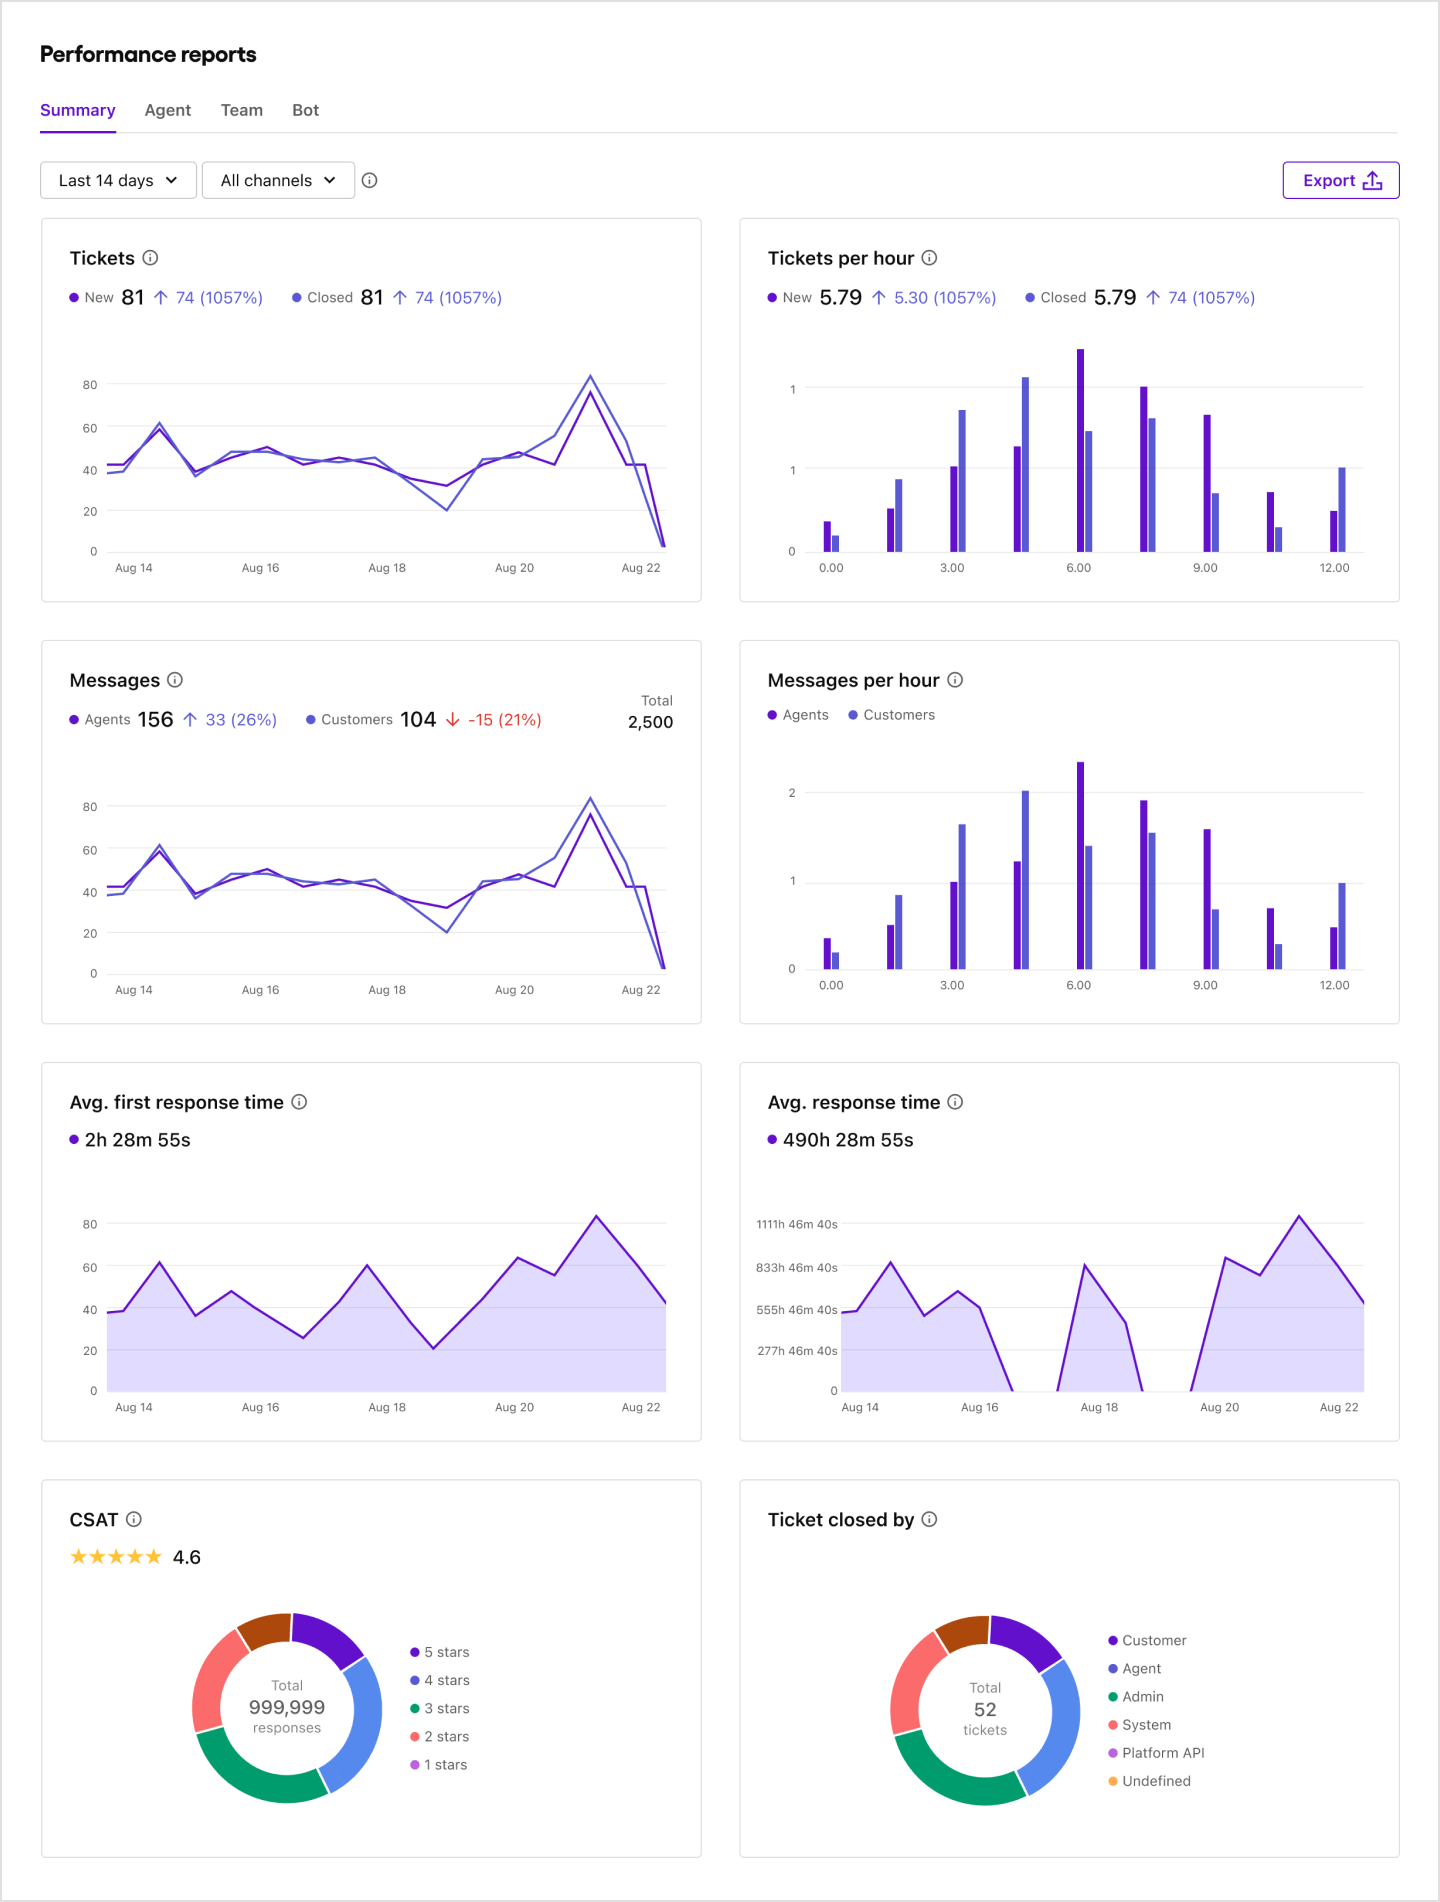 Image|Showing performance reports summary